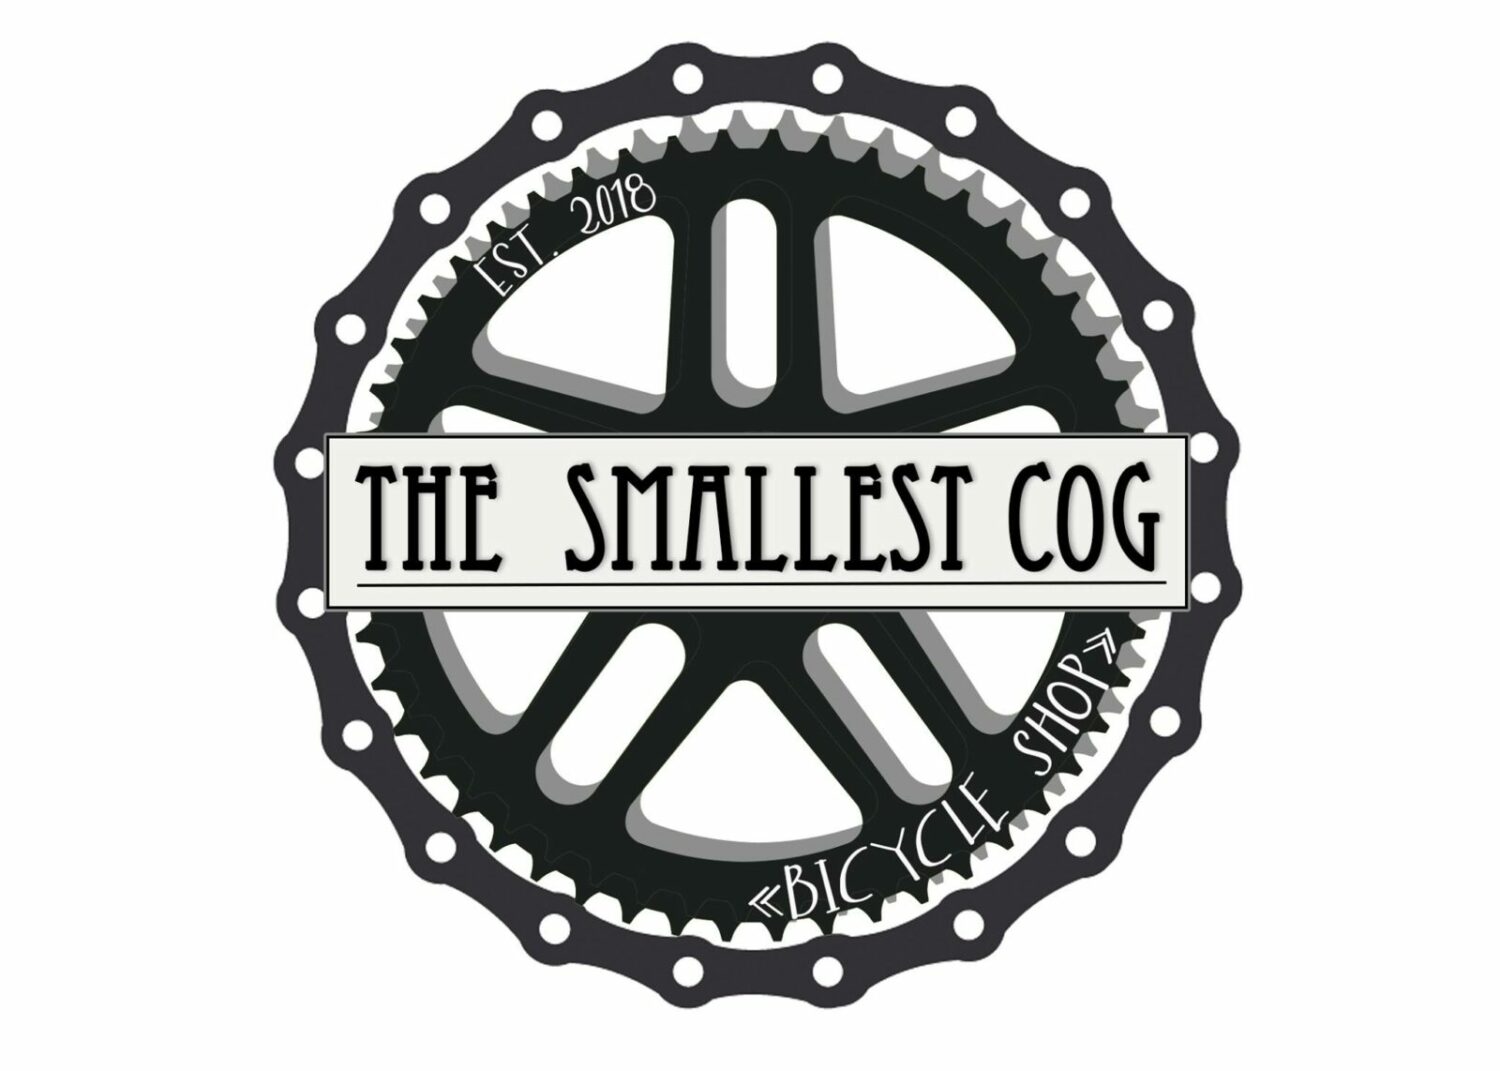 The Smallest Cog